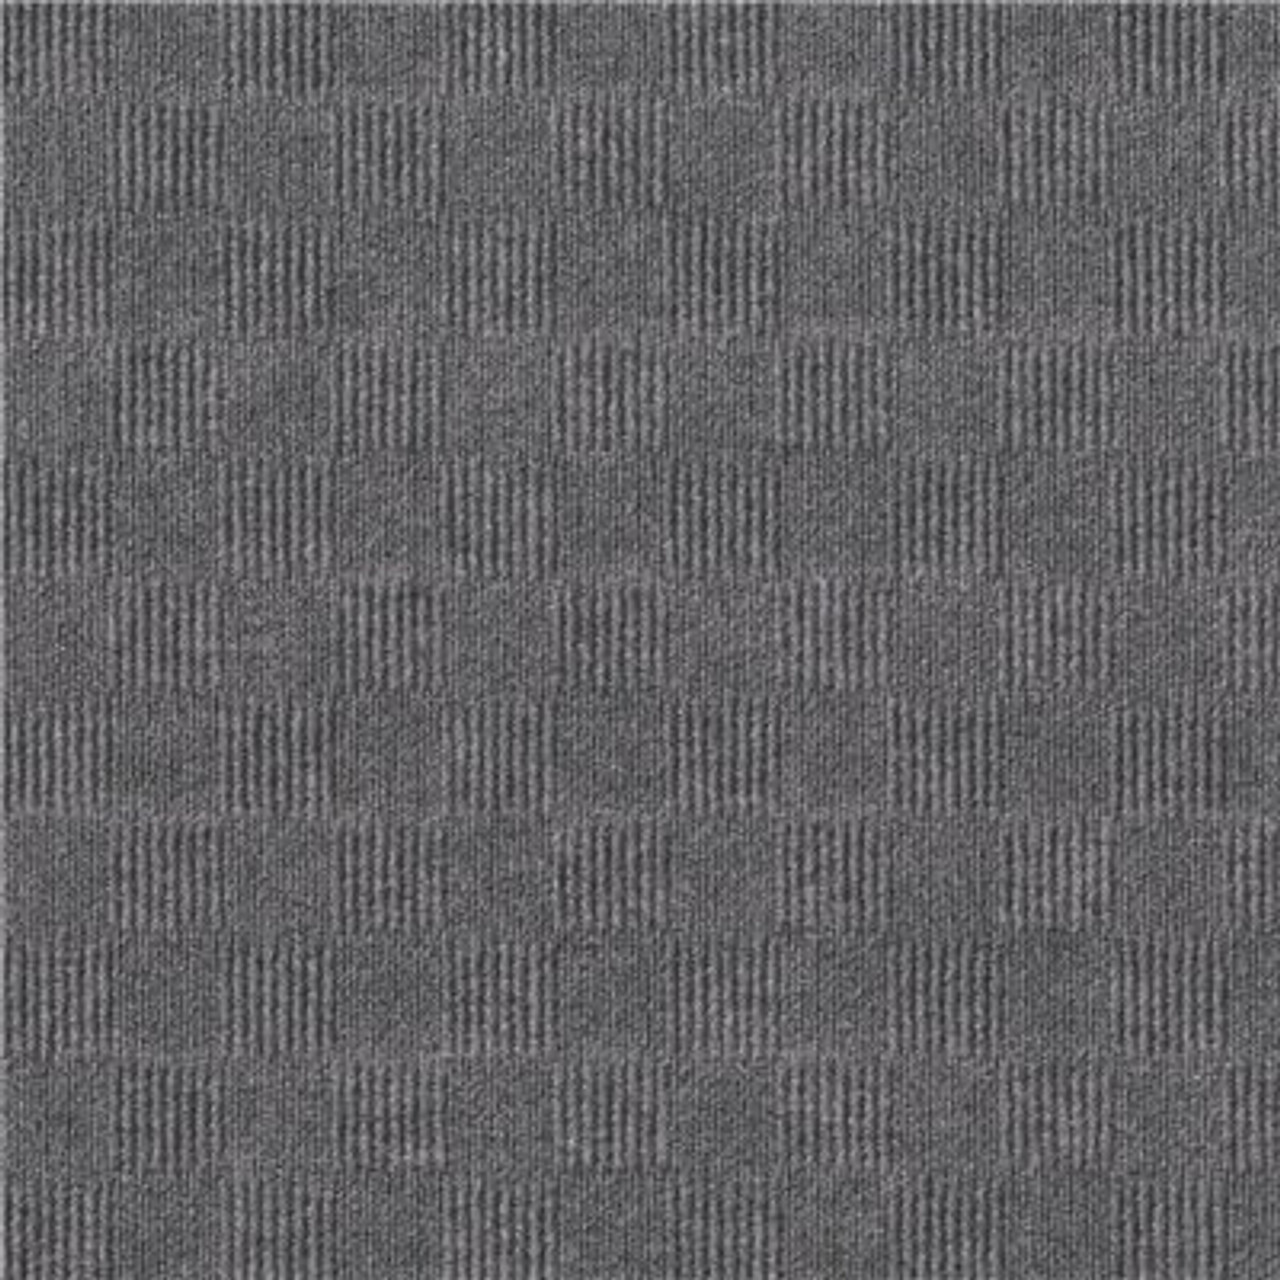 Foss First Impressions City Block Sky Grey 24 In. X 24 In. Commercial Peel And Stick Carpet Tile (15-Tile / Case)